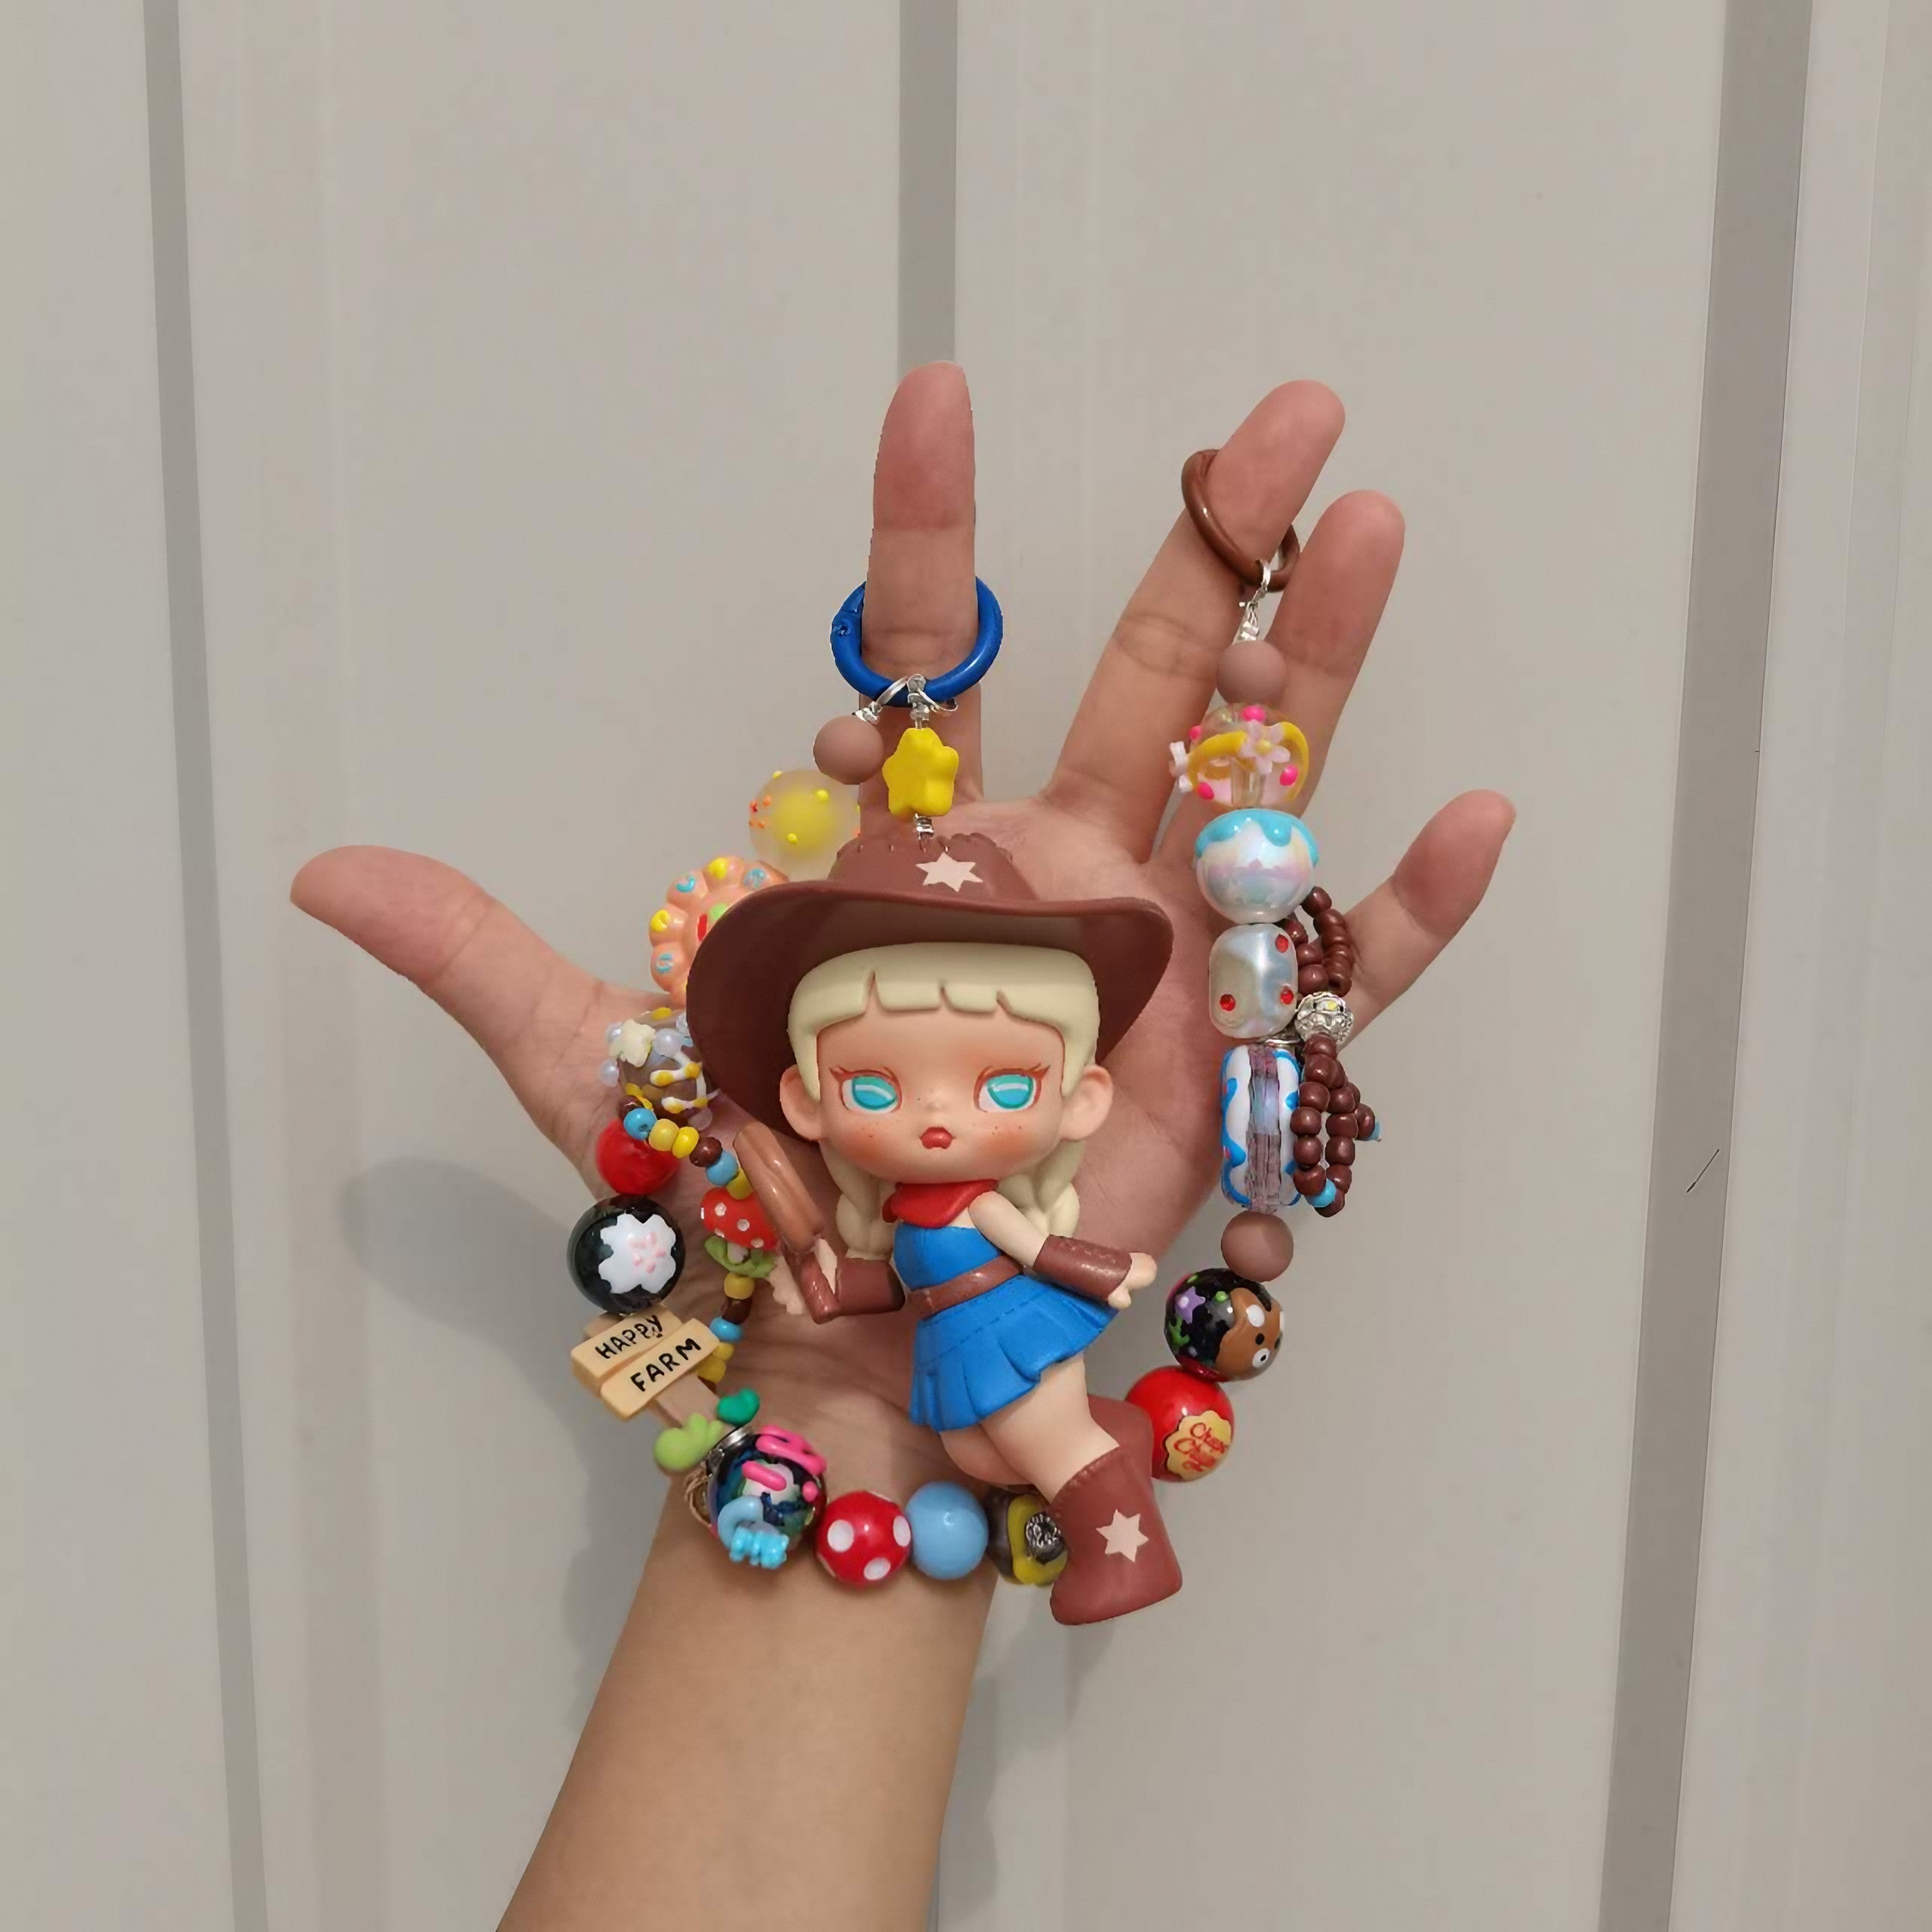 A hand displaying a kawaii cowboy keychain attached to a colorful bracelet